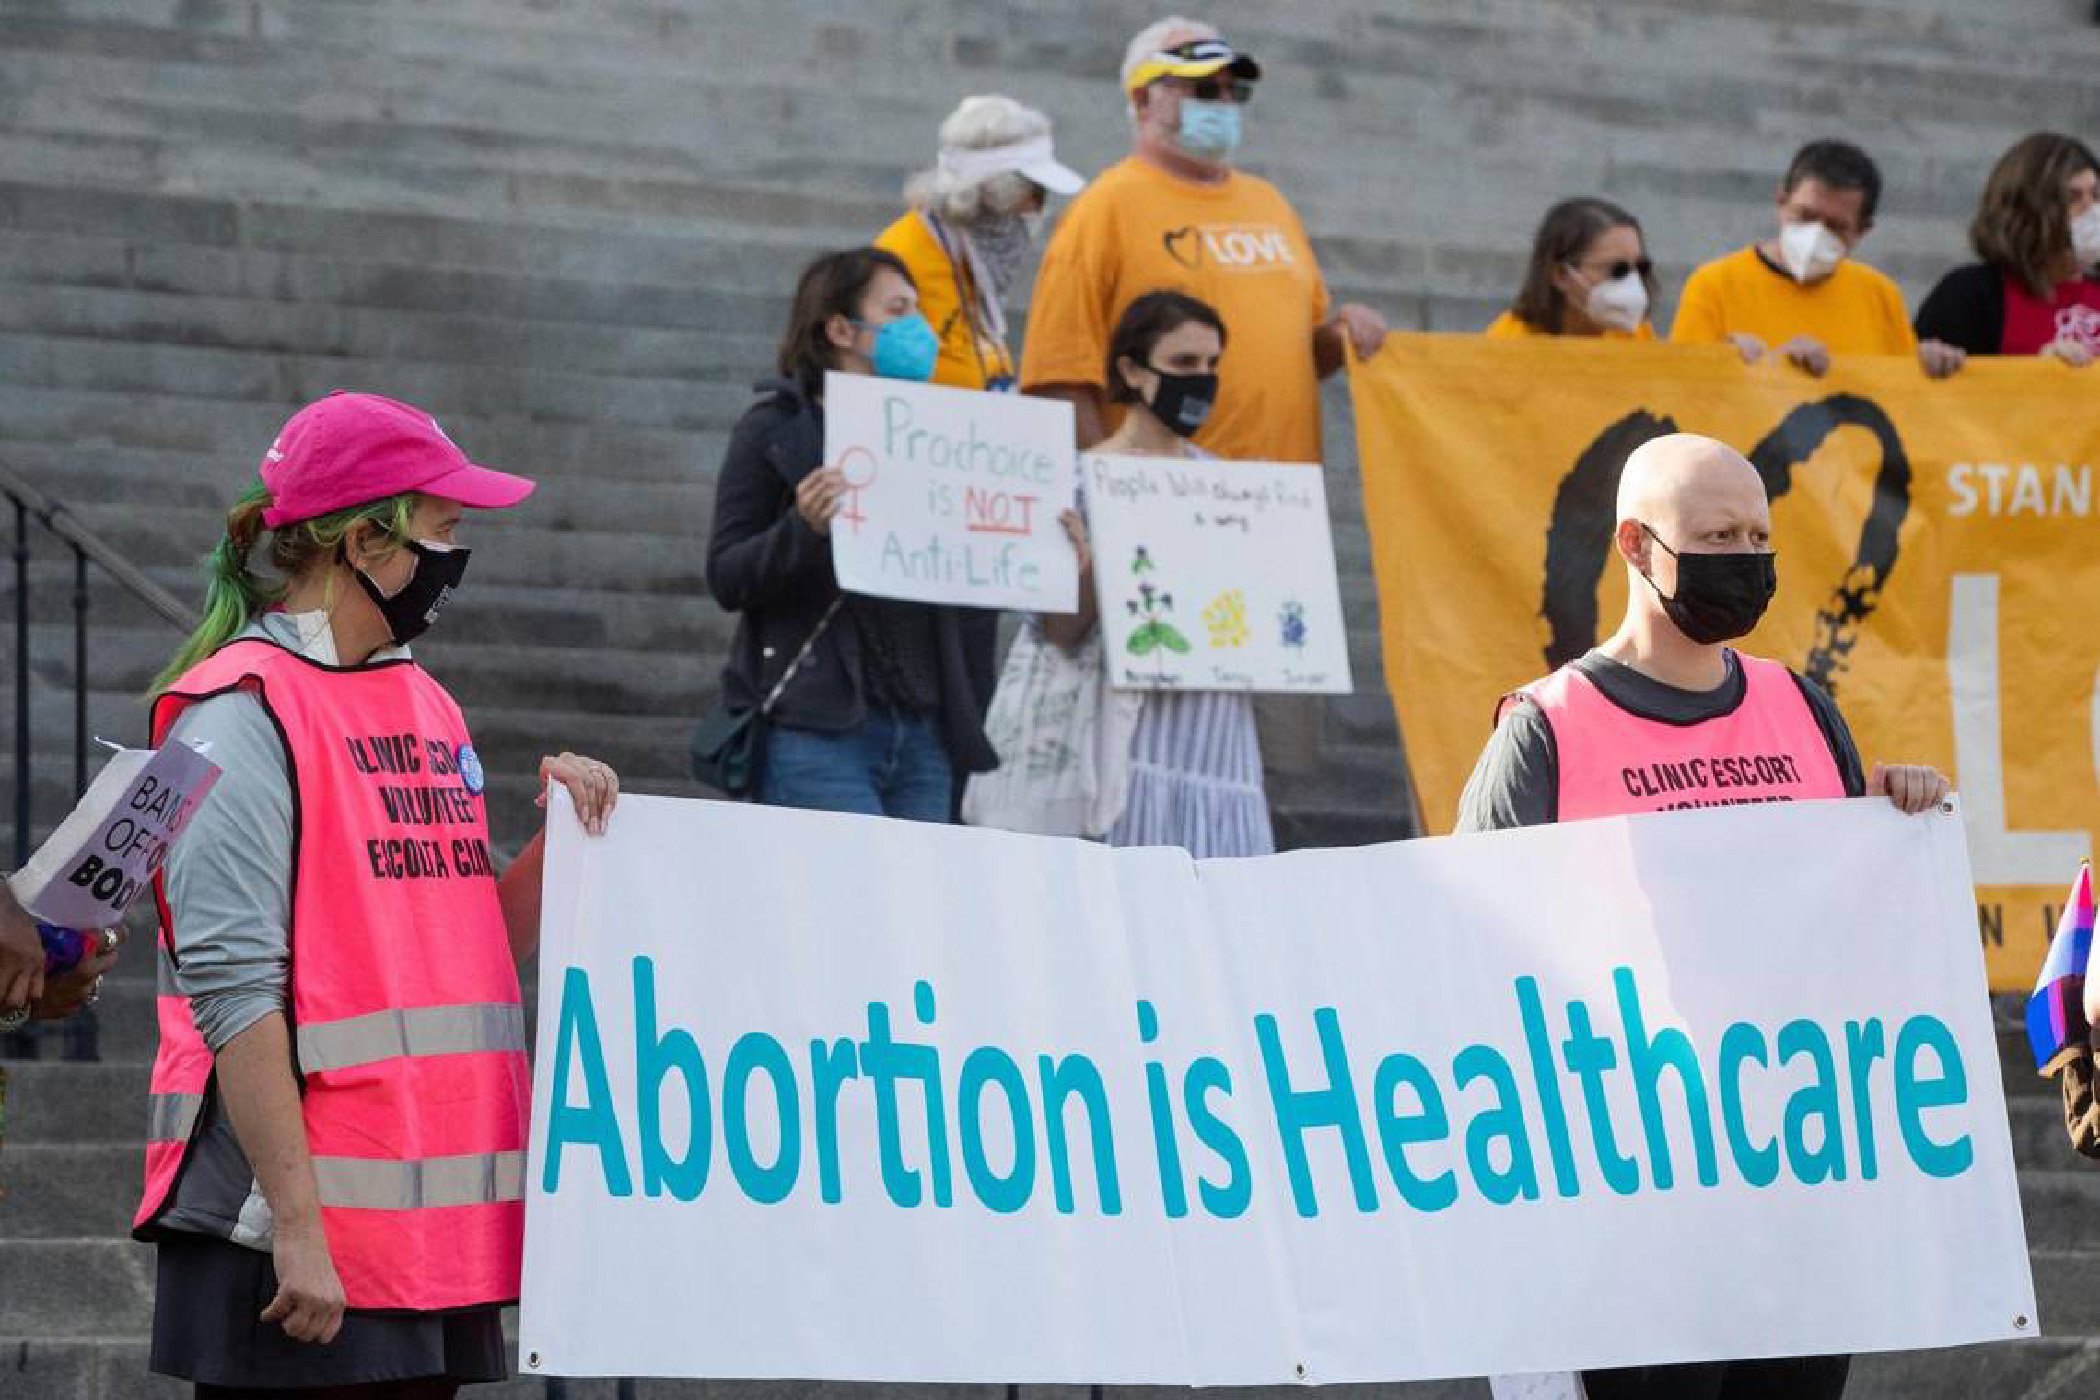 South Carolina Bill Would Subject Those Obtaining Abortions to Death